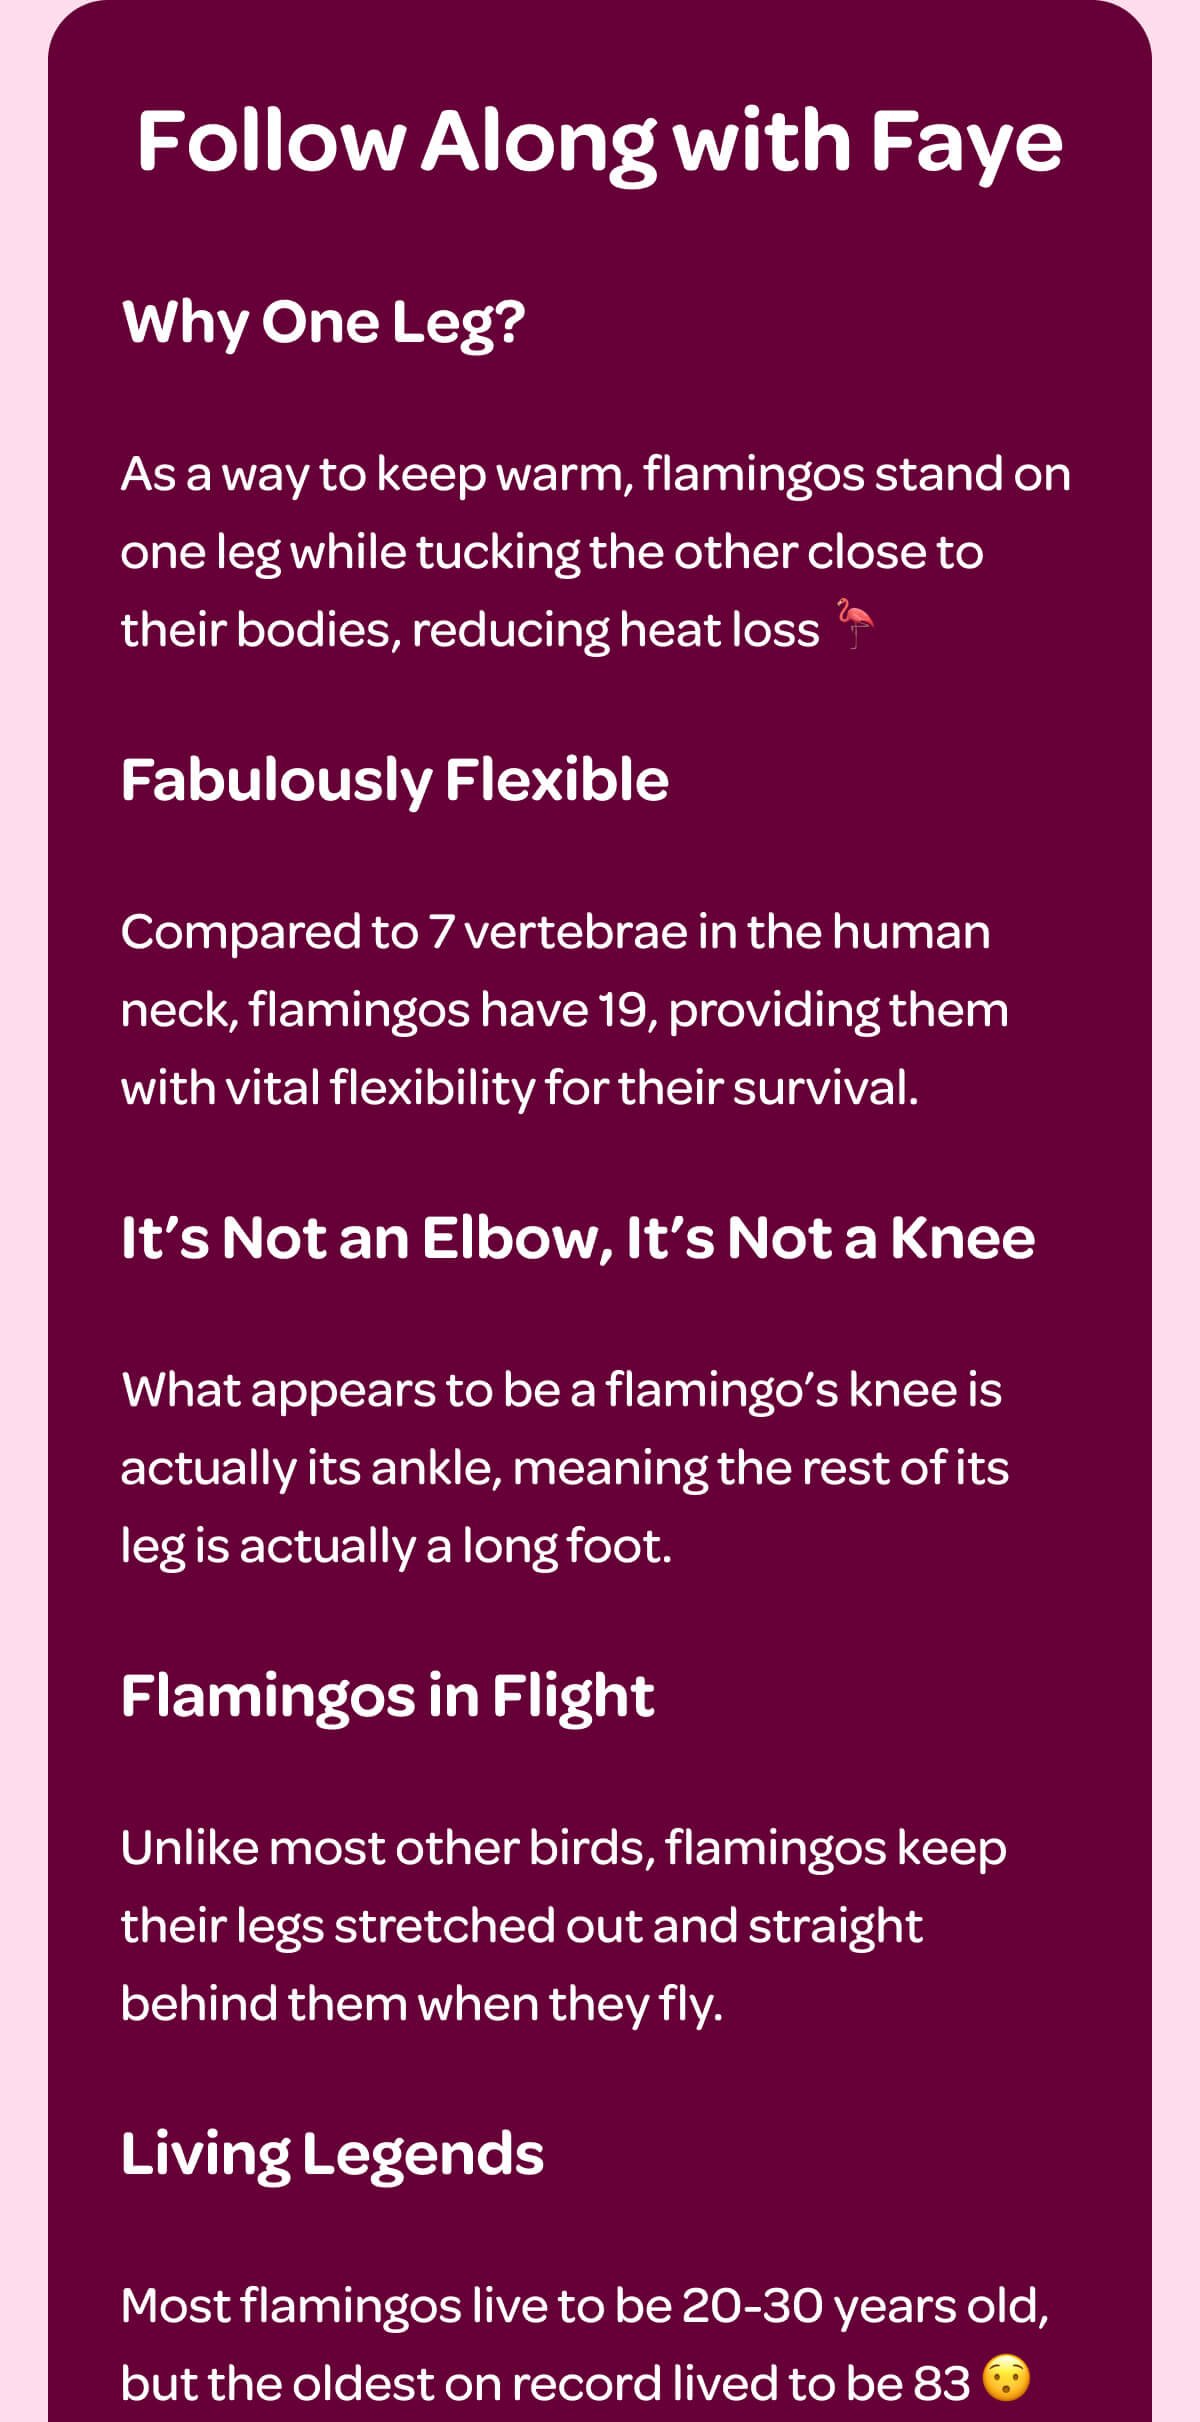 Follow Along with Faye. Why One Leg? As a way to keep warm, flamingos stand on one leg while tucking the other close to their bodies, reducing heat loss \U0001f9a9 Fabulously Flexible. Compared to 7 vertebrae in the human neck, flamingos have 19, providing them with vital flexibility for their survival. It’s Not an Elbow, It’s Not a Knee. What appears to be a flamingo’s knee is actually its ankle, meaning the rest of its leg is actually a long foot. Flamingos in Flight. Unlike most other birds, flamingos keep their legs stretched out and straight behind them when they fly. Living Legends. Most flamingos live to be 20-30 years old, but the oldest on record lived to be 83 😯